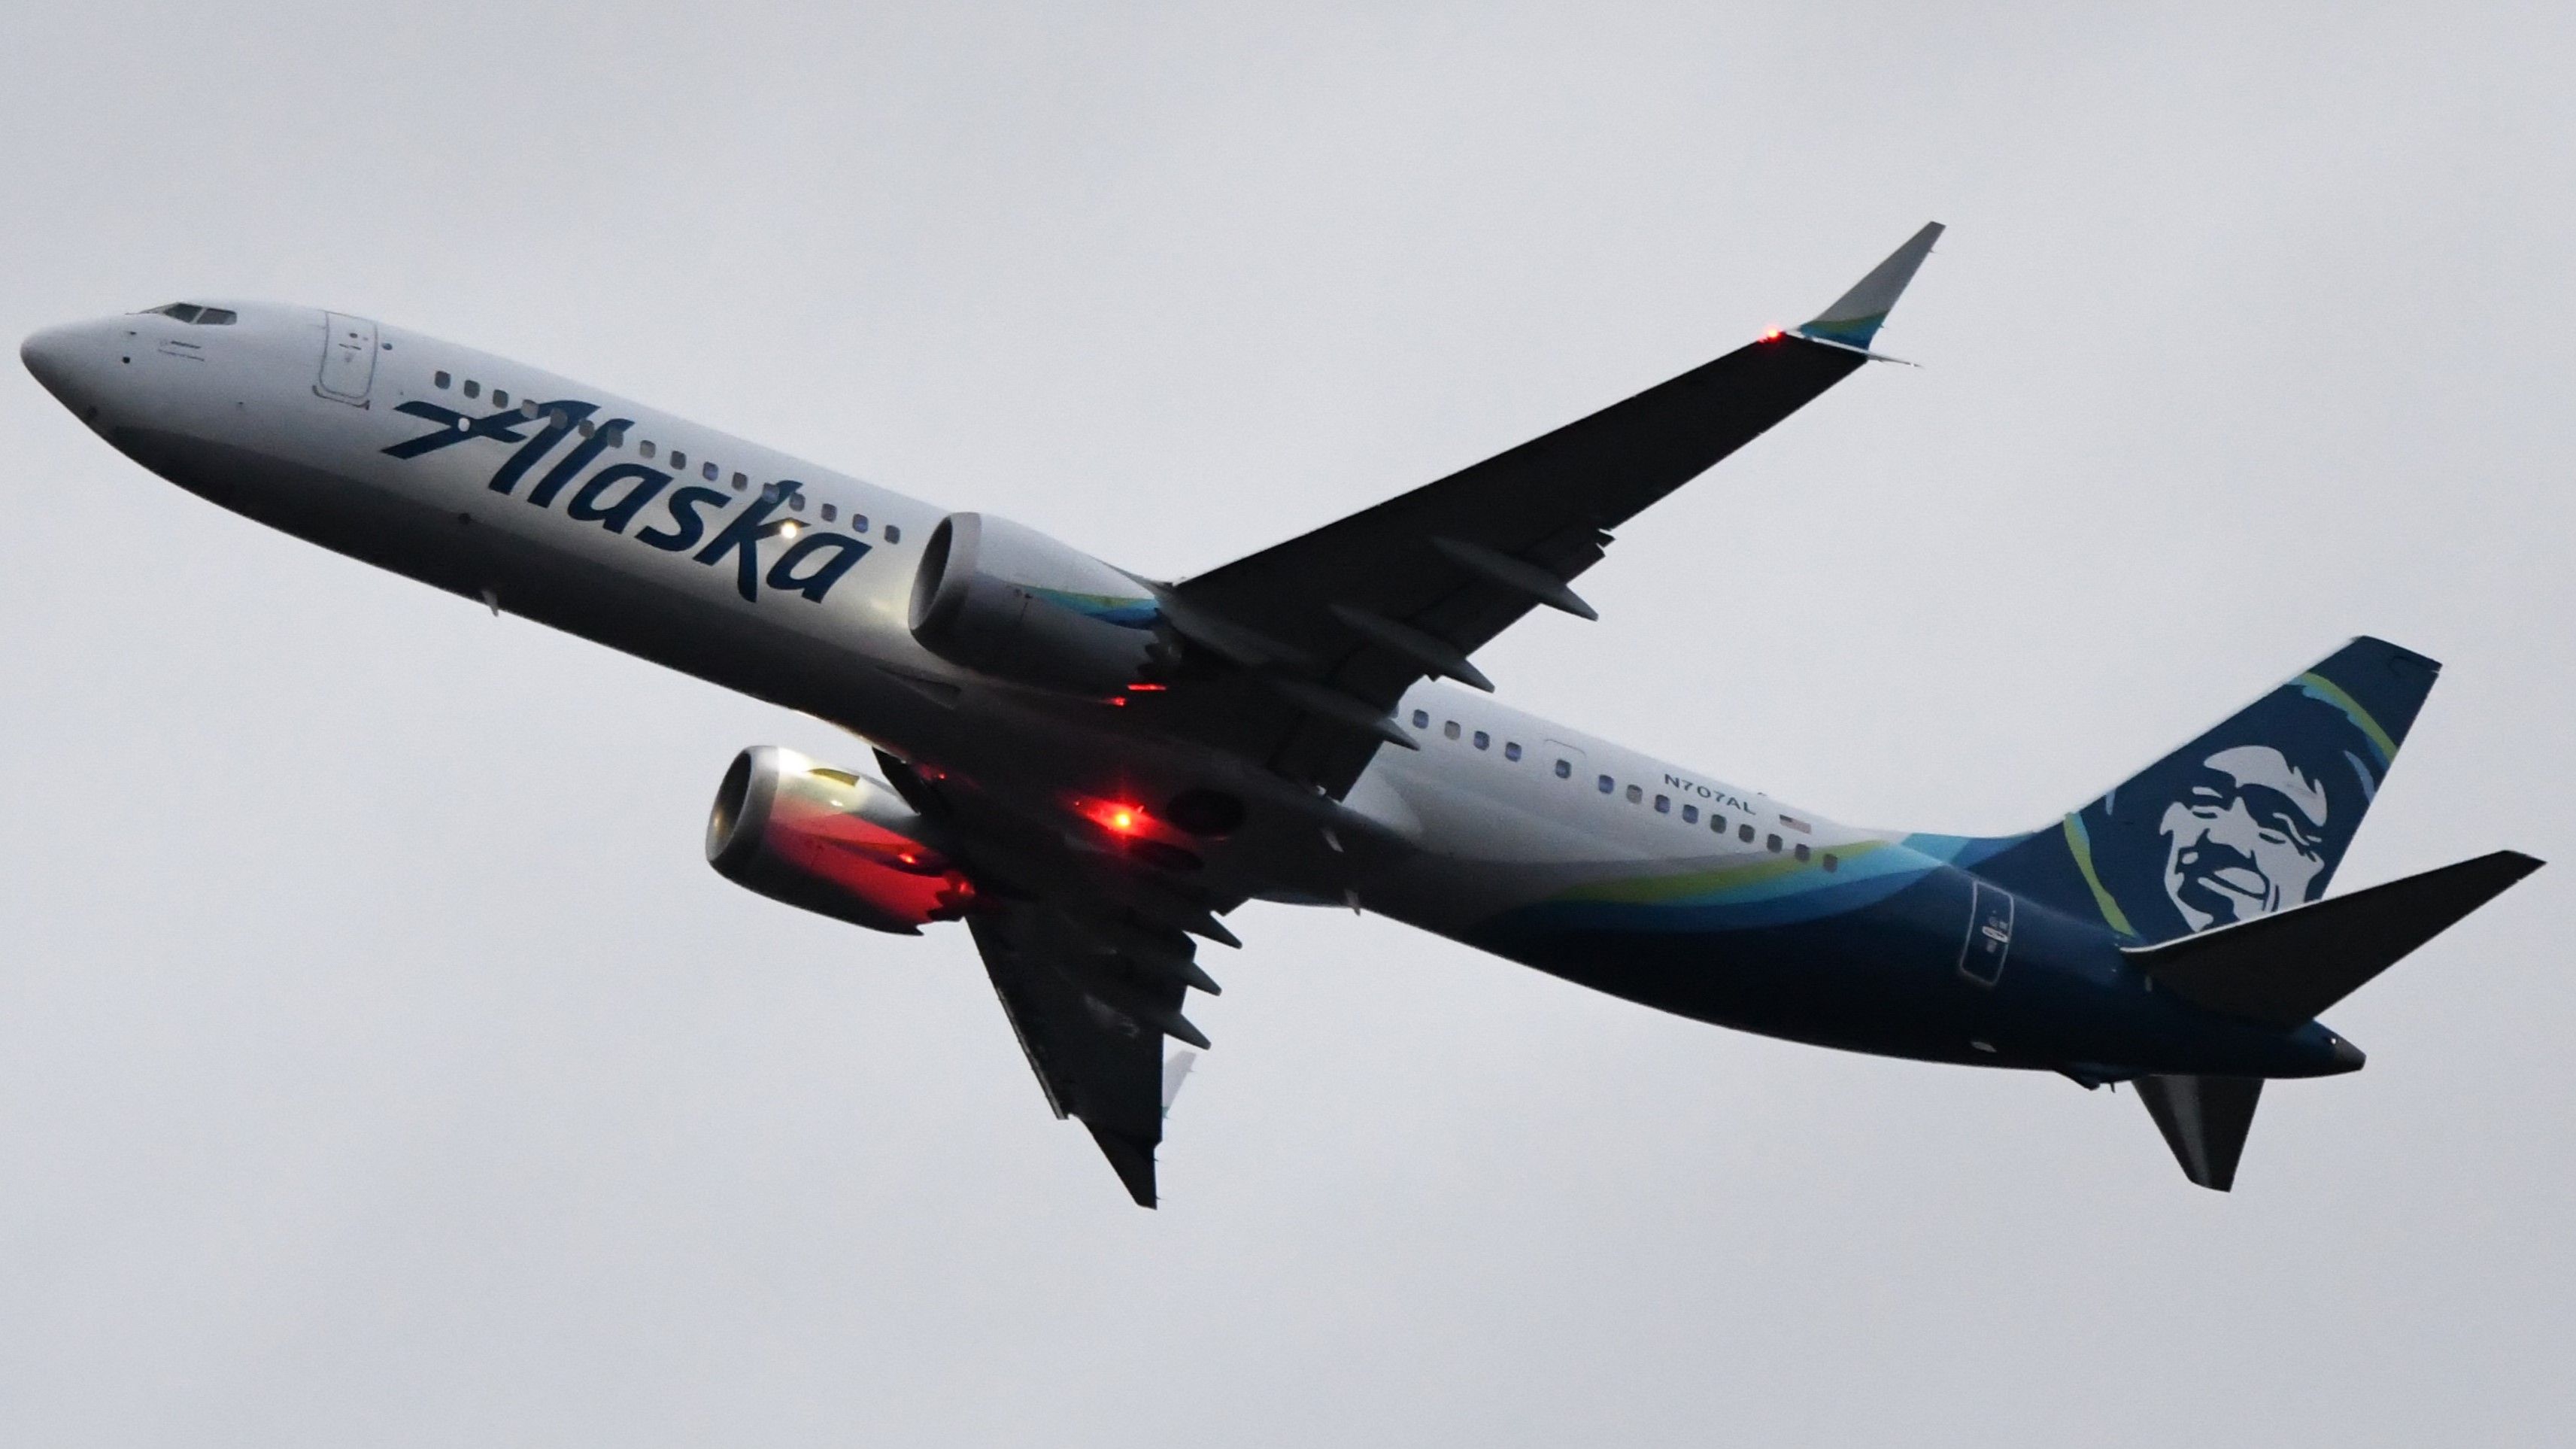 DSC_3125 - 16x9 - Rising Alaska Airlines Boeing 737-9 MAX With Red Beacon On